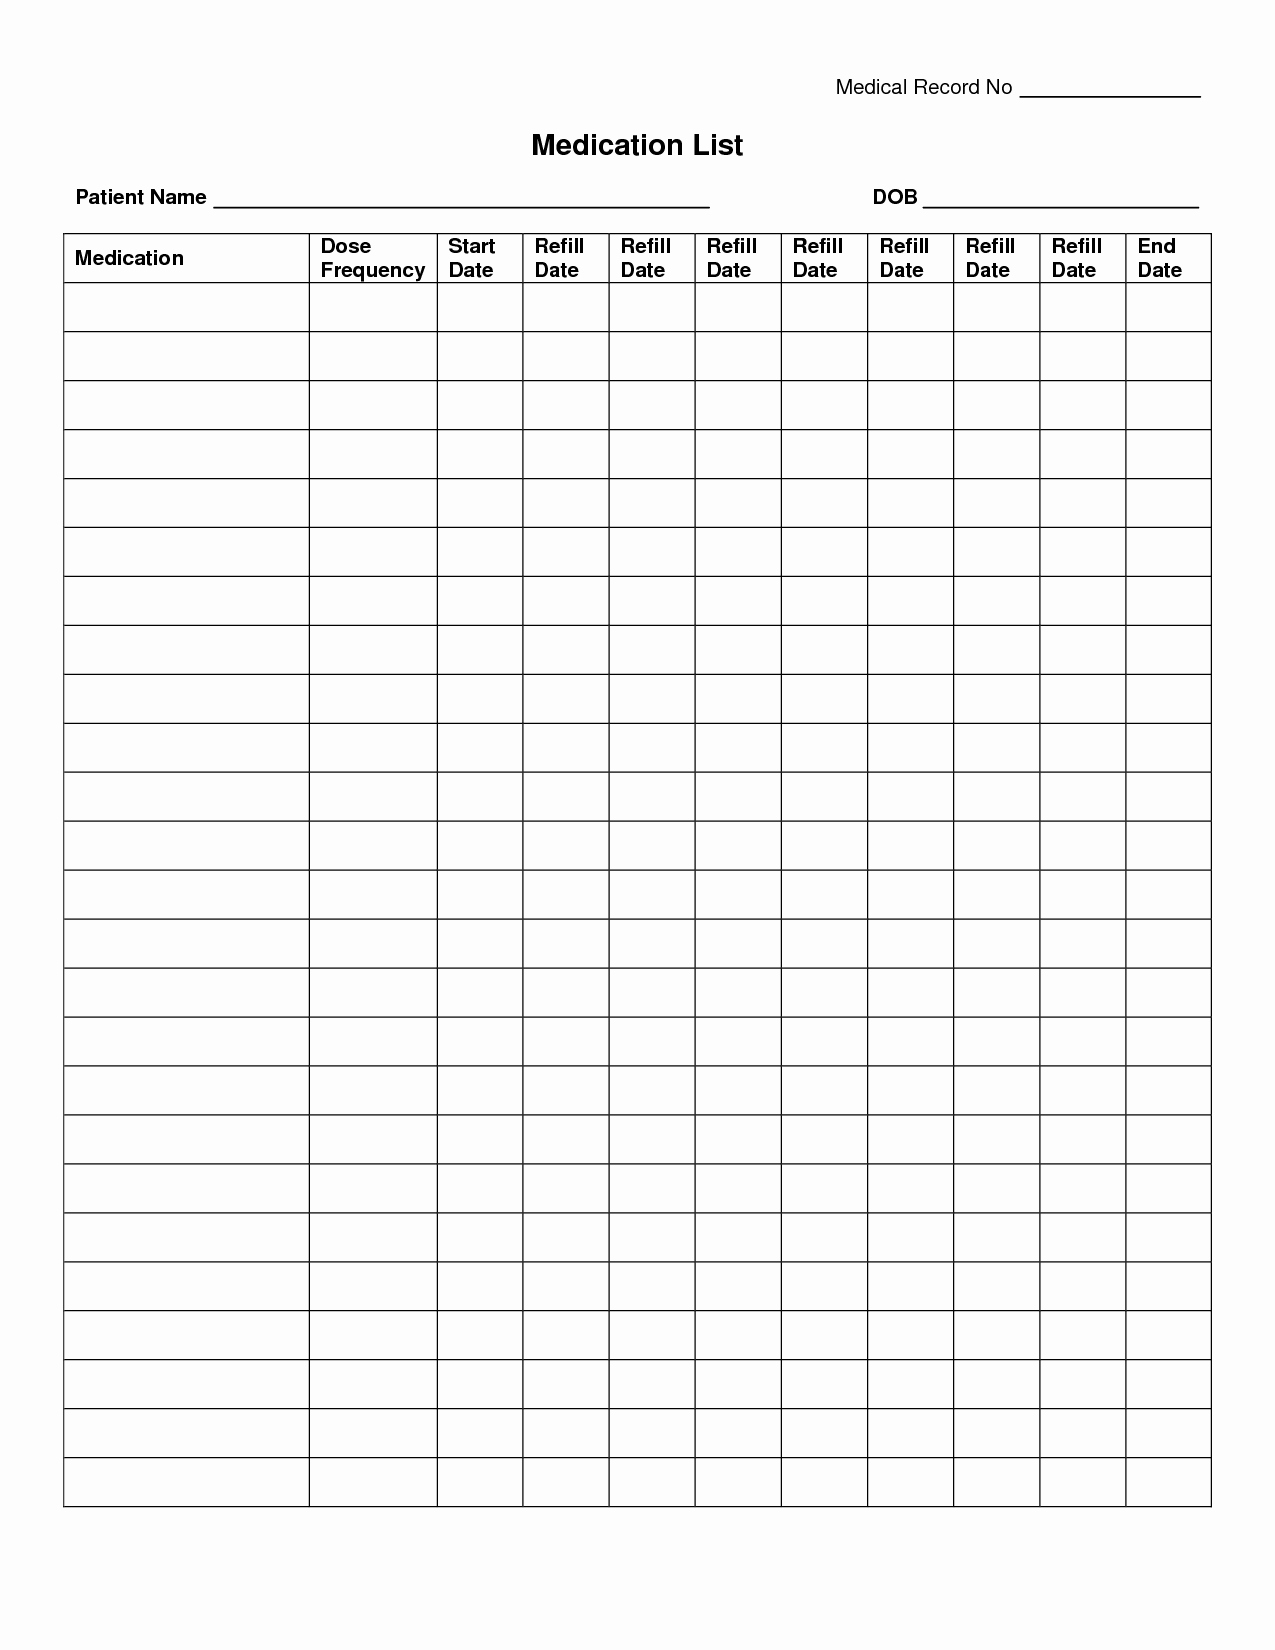 Medication Administration Record Template Unique Free Medication Administration Record Template Excel